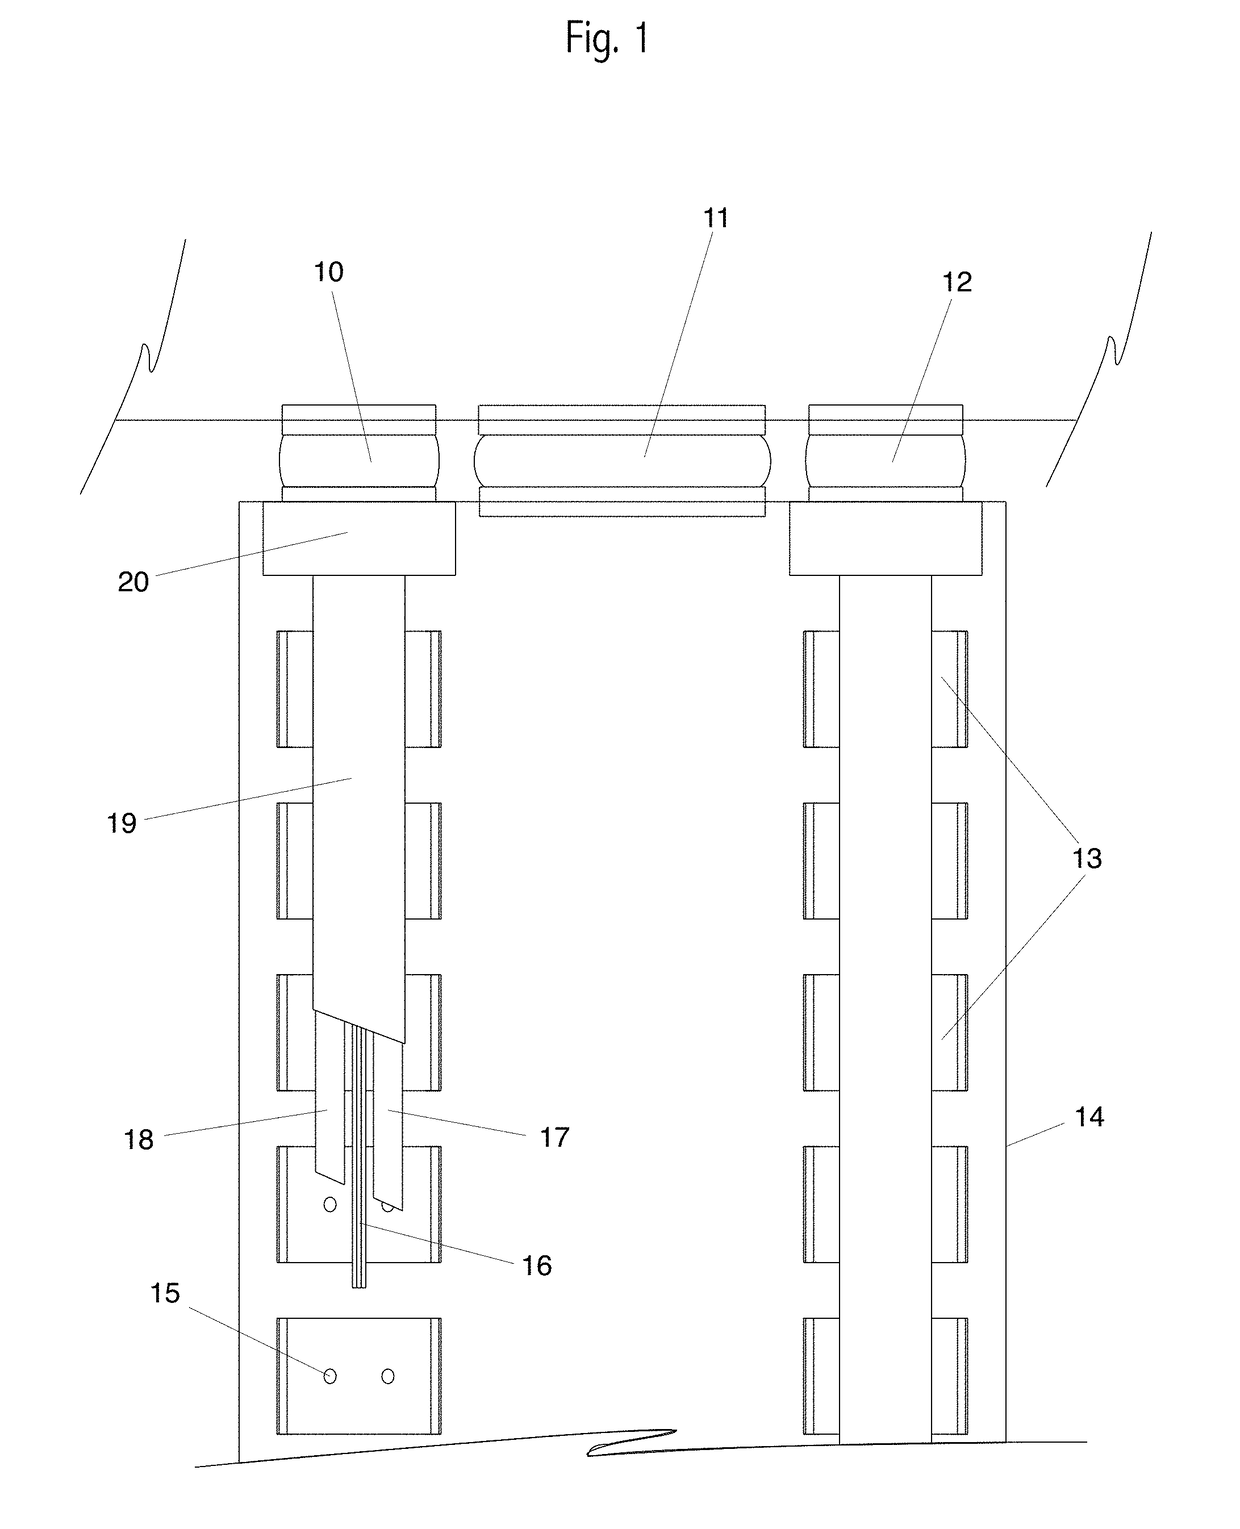 Animal monitoring device and method